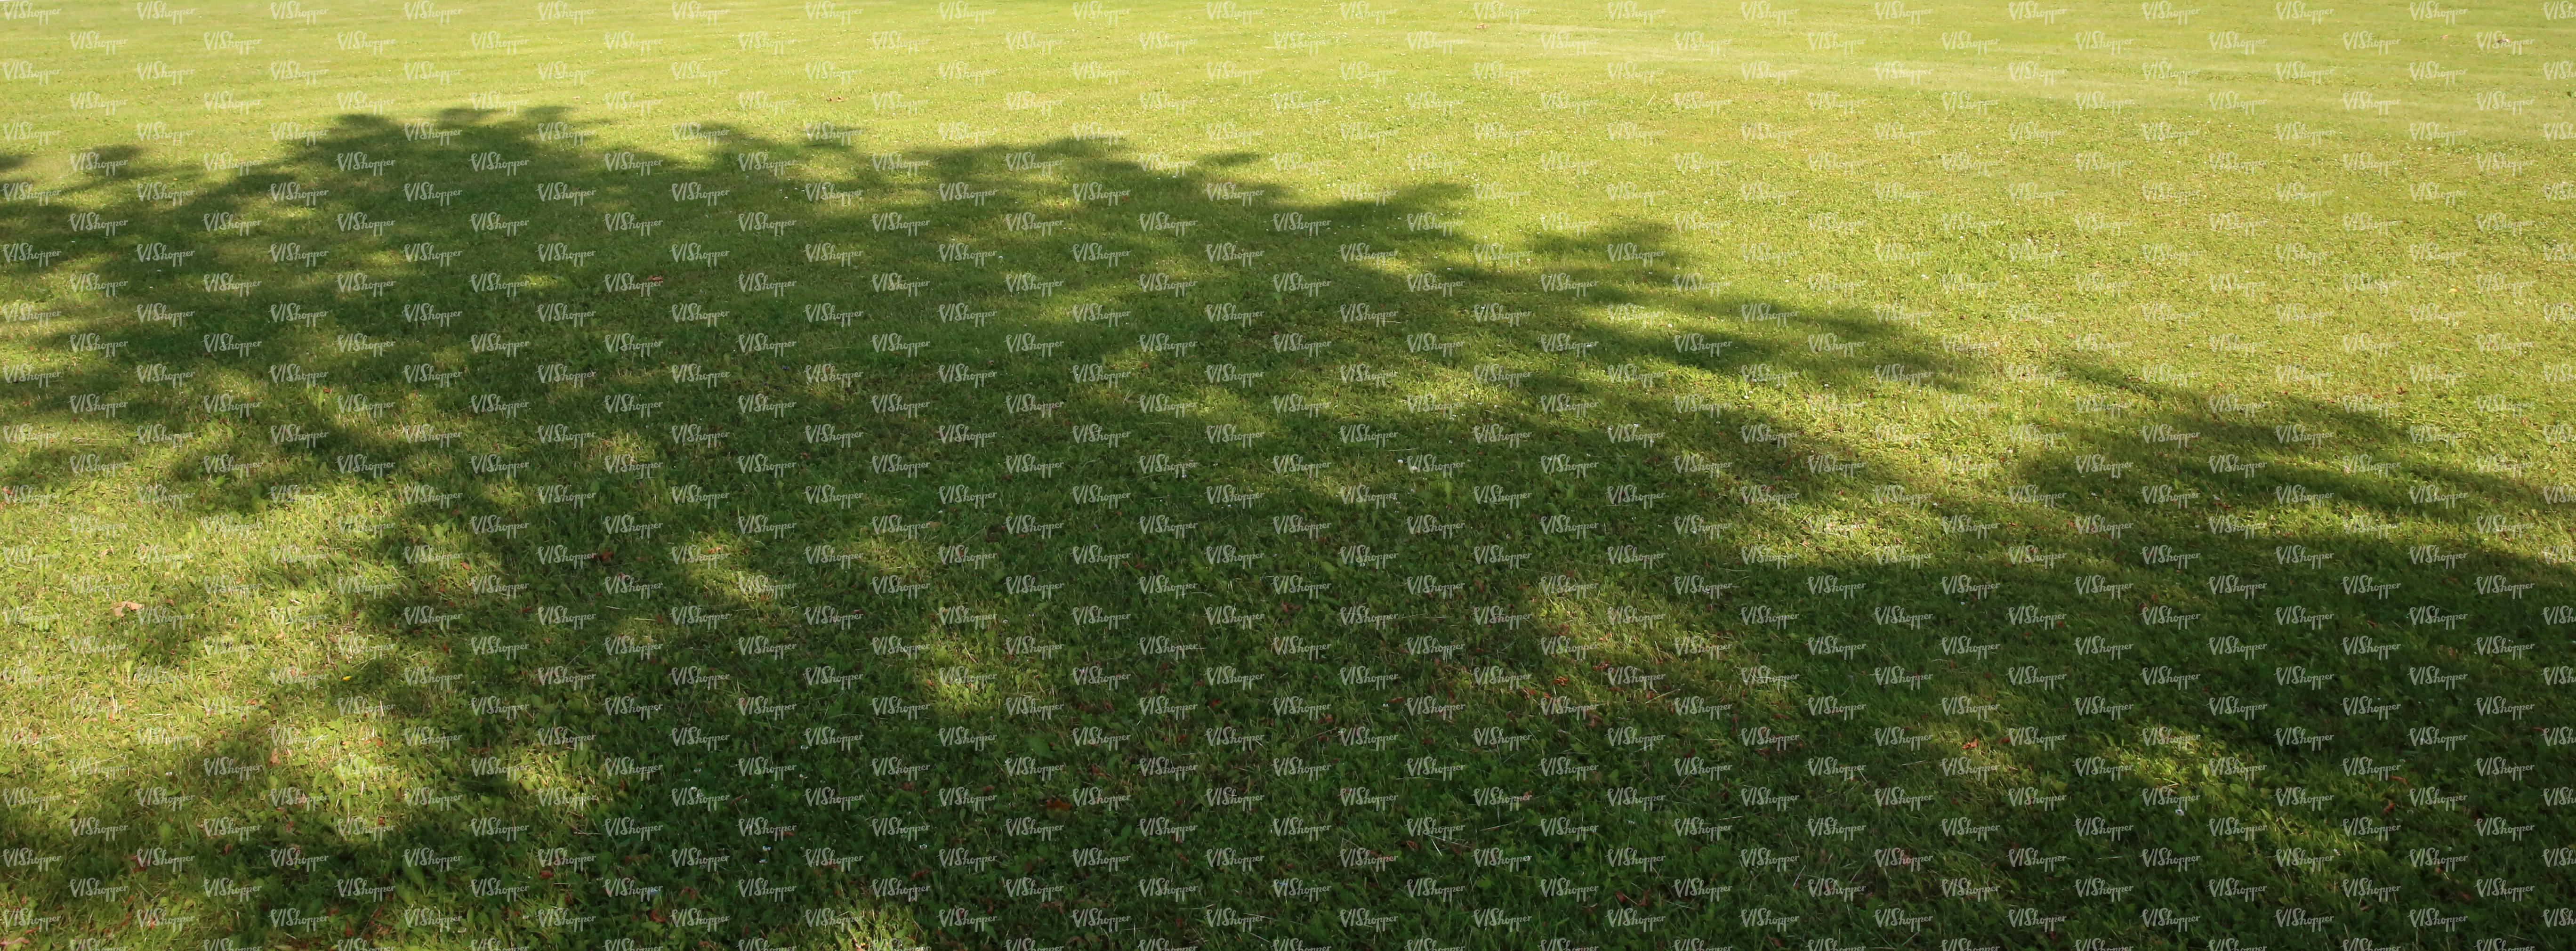 lawn with a tree shadow - ground textures - VIShopper